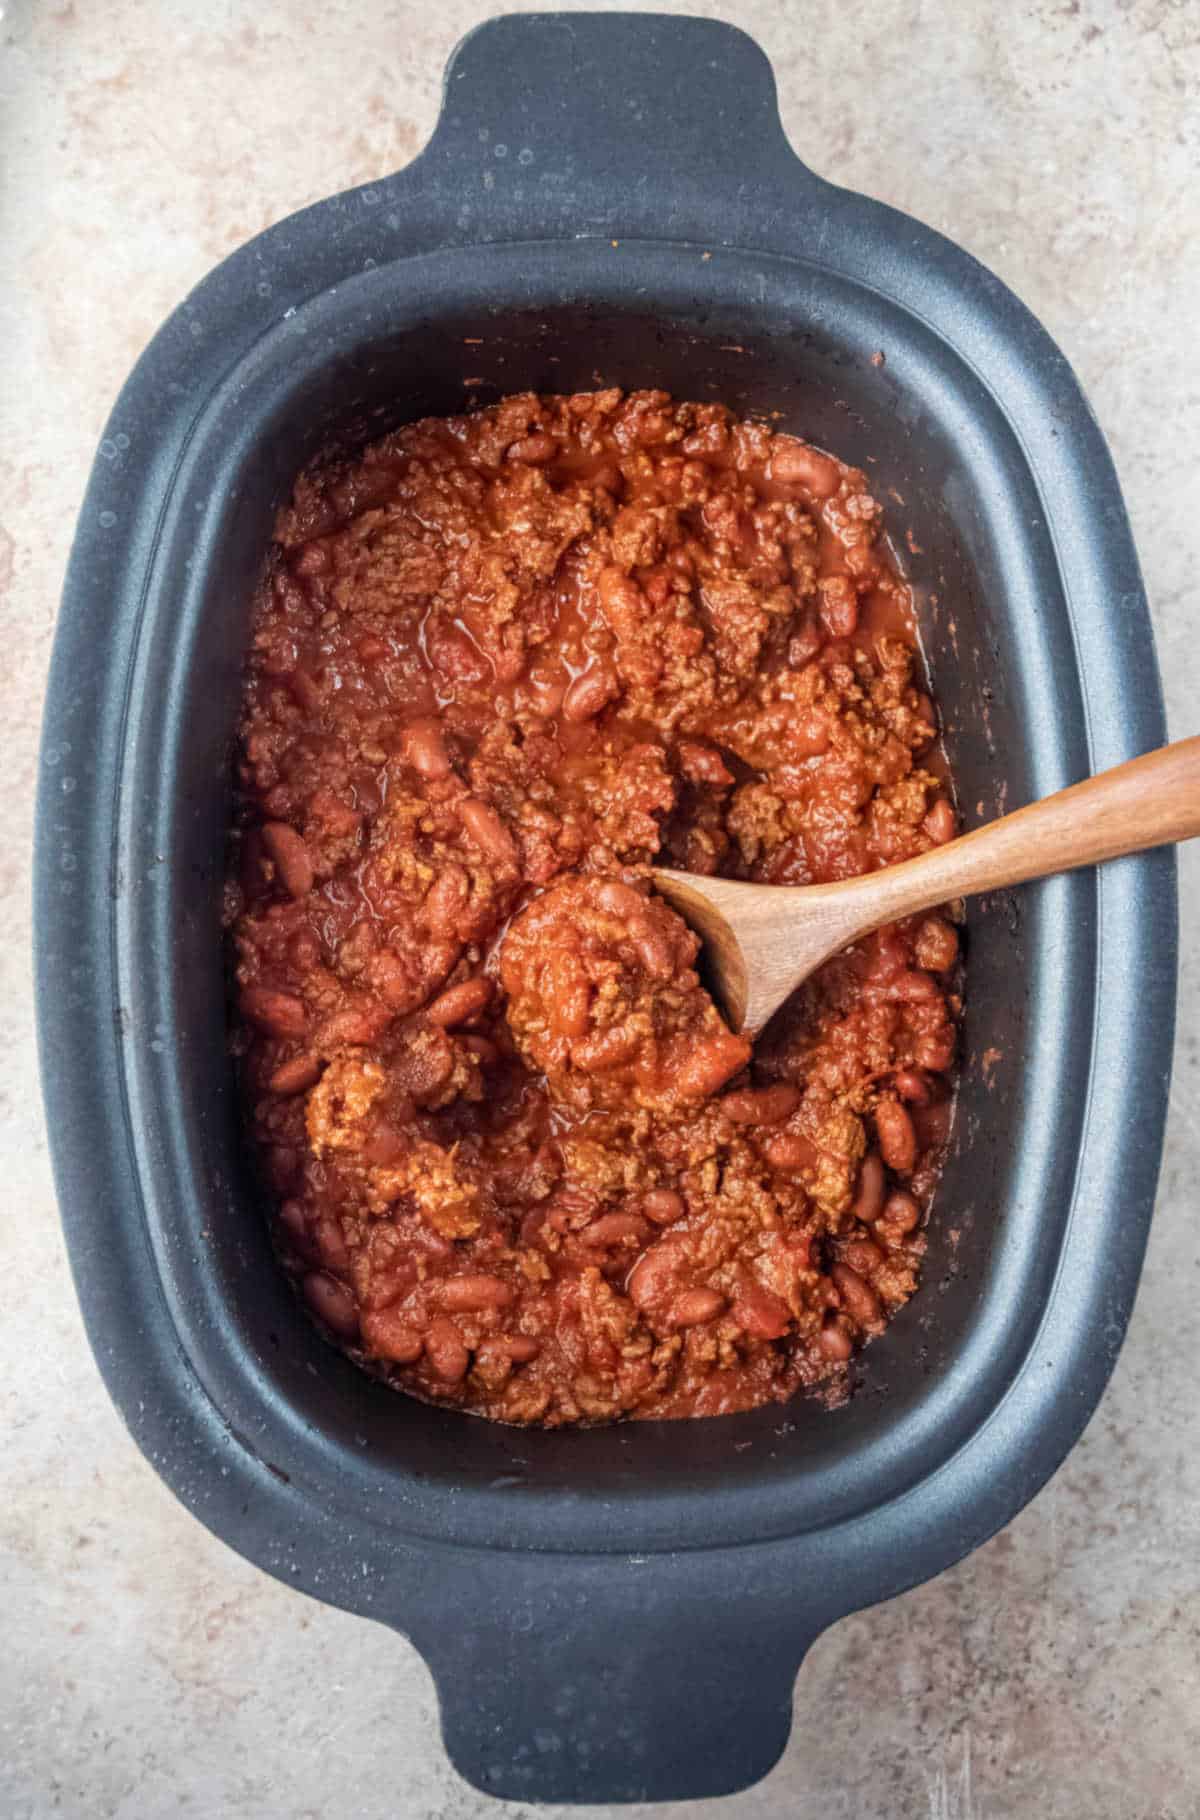 Wooden spoon in a crock pot full of chili. 